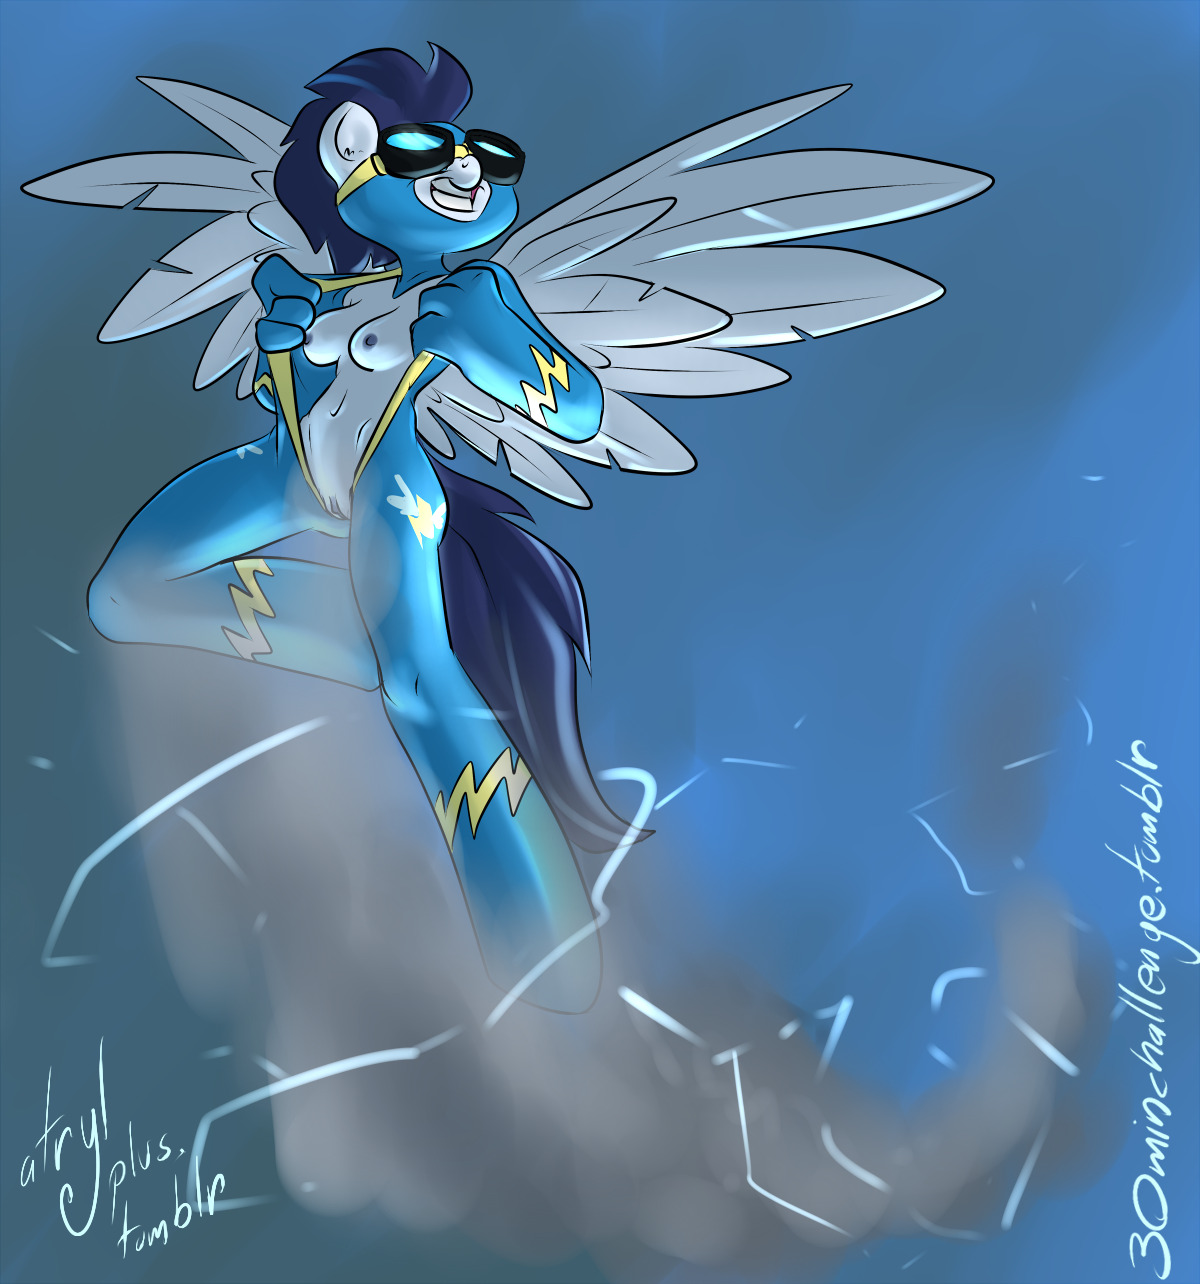 Soarin&rsquo; r63 for the 30min challenge. Check out the other&rsquo;s stuff,